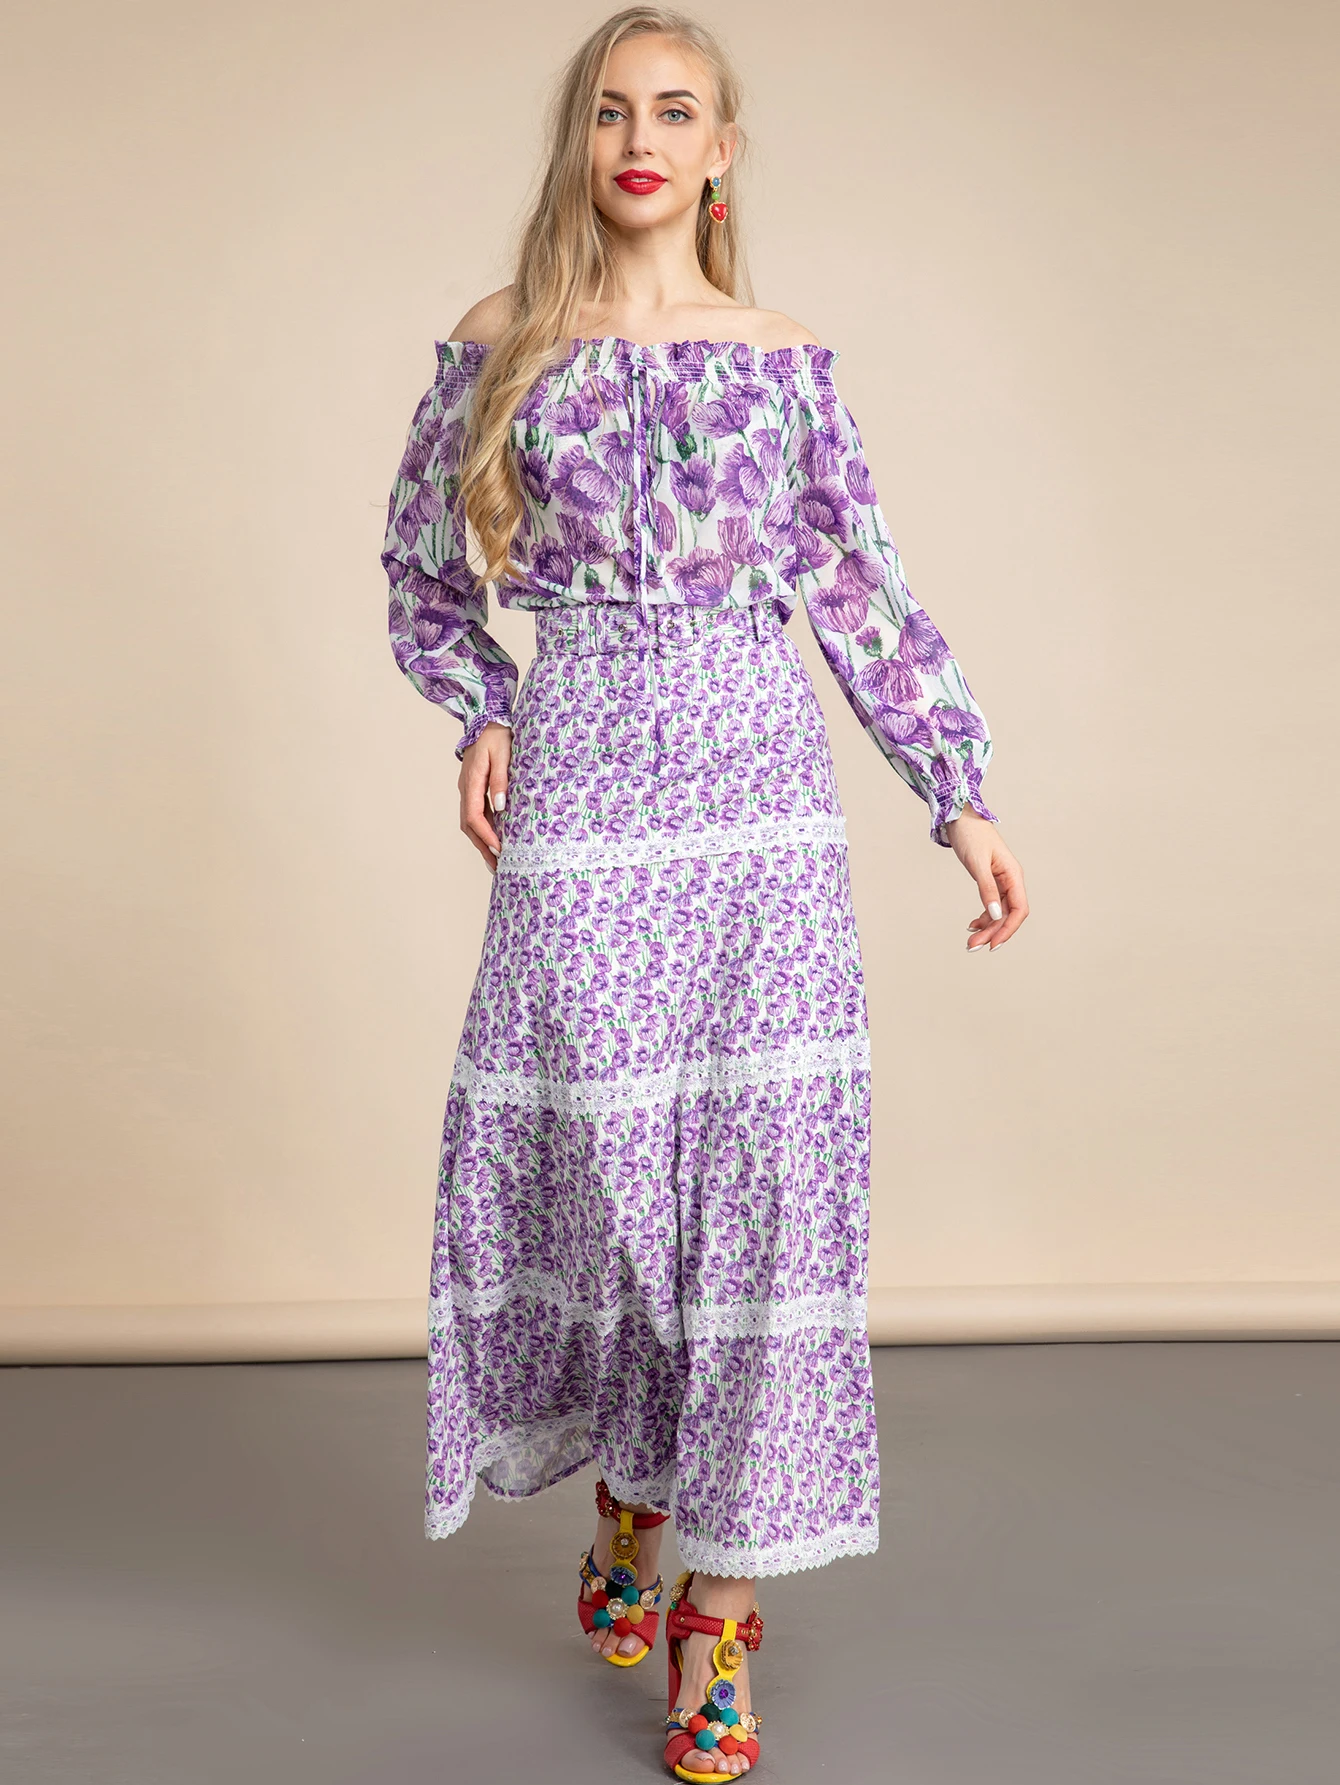 LD LINDA DELLA 2022 Summer Runway Fashion Vacation Skirt Suit Women's Purple Long sleeve Floral Blouse and Skirts 2 Pieces Set